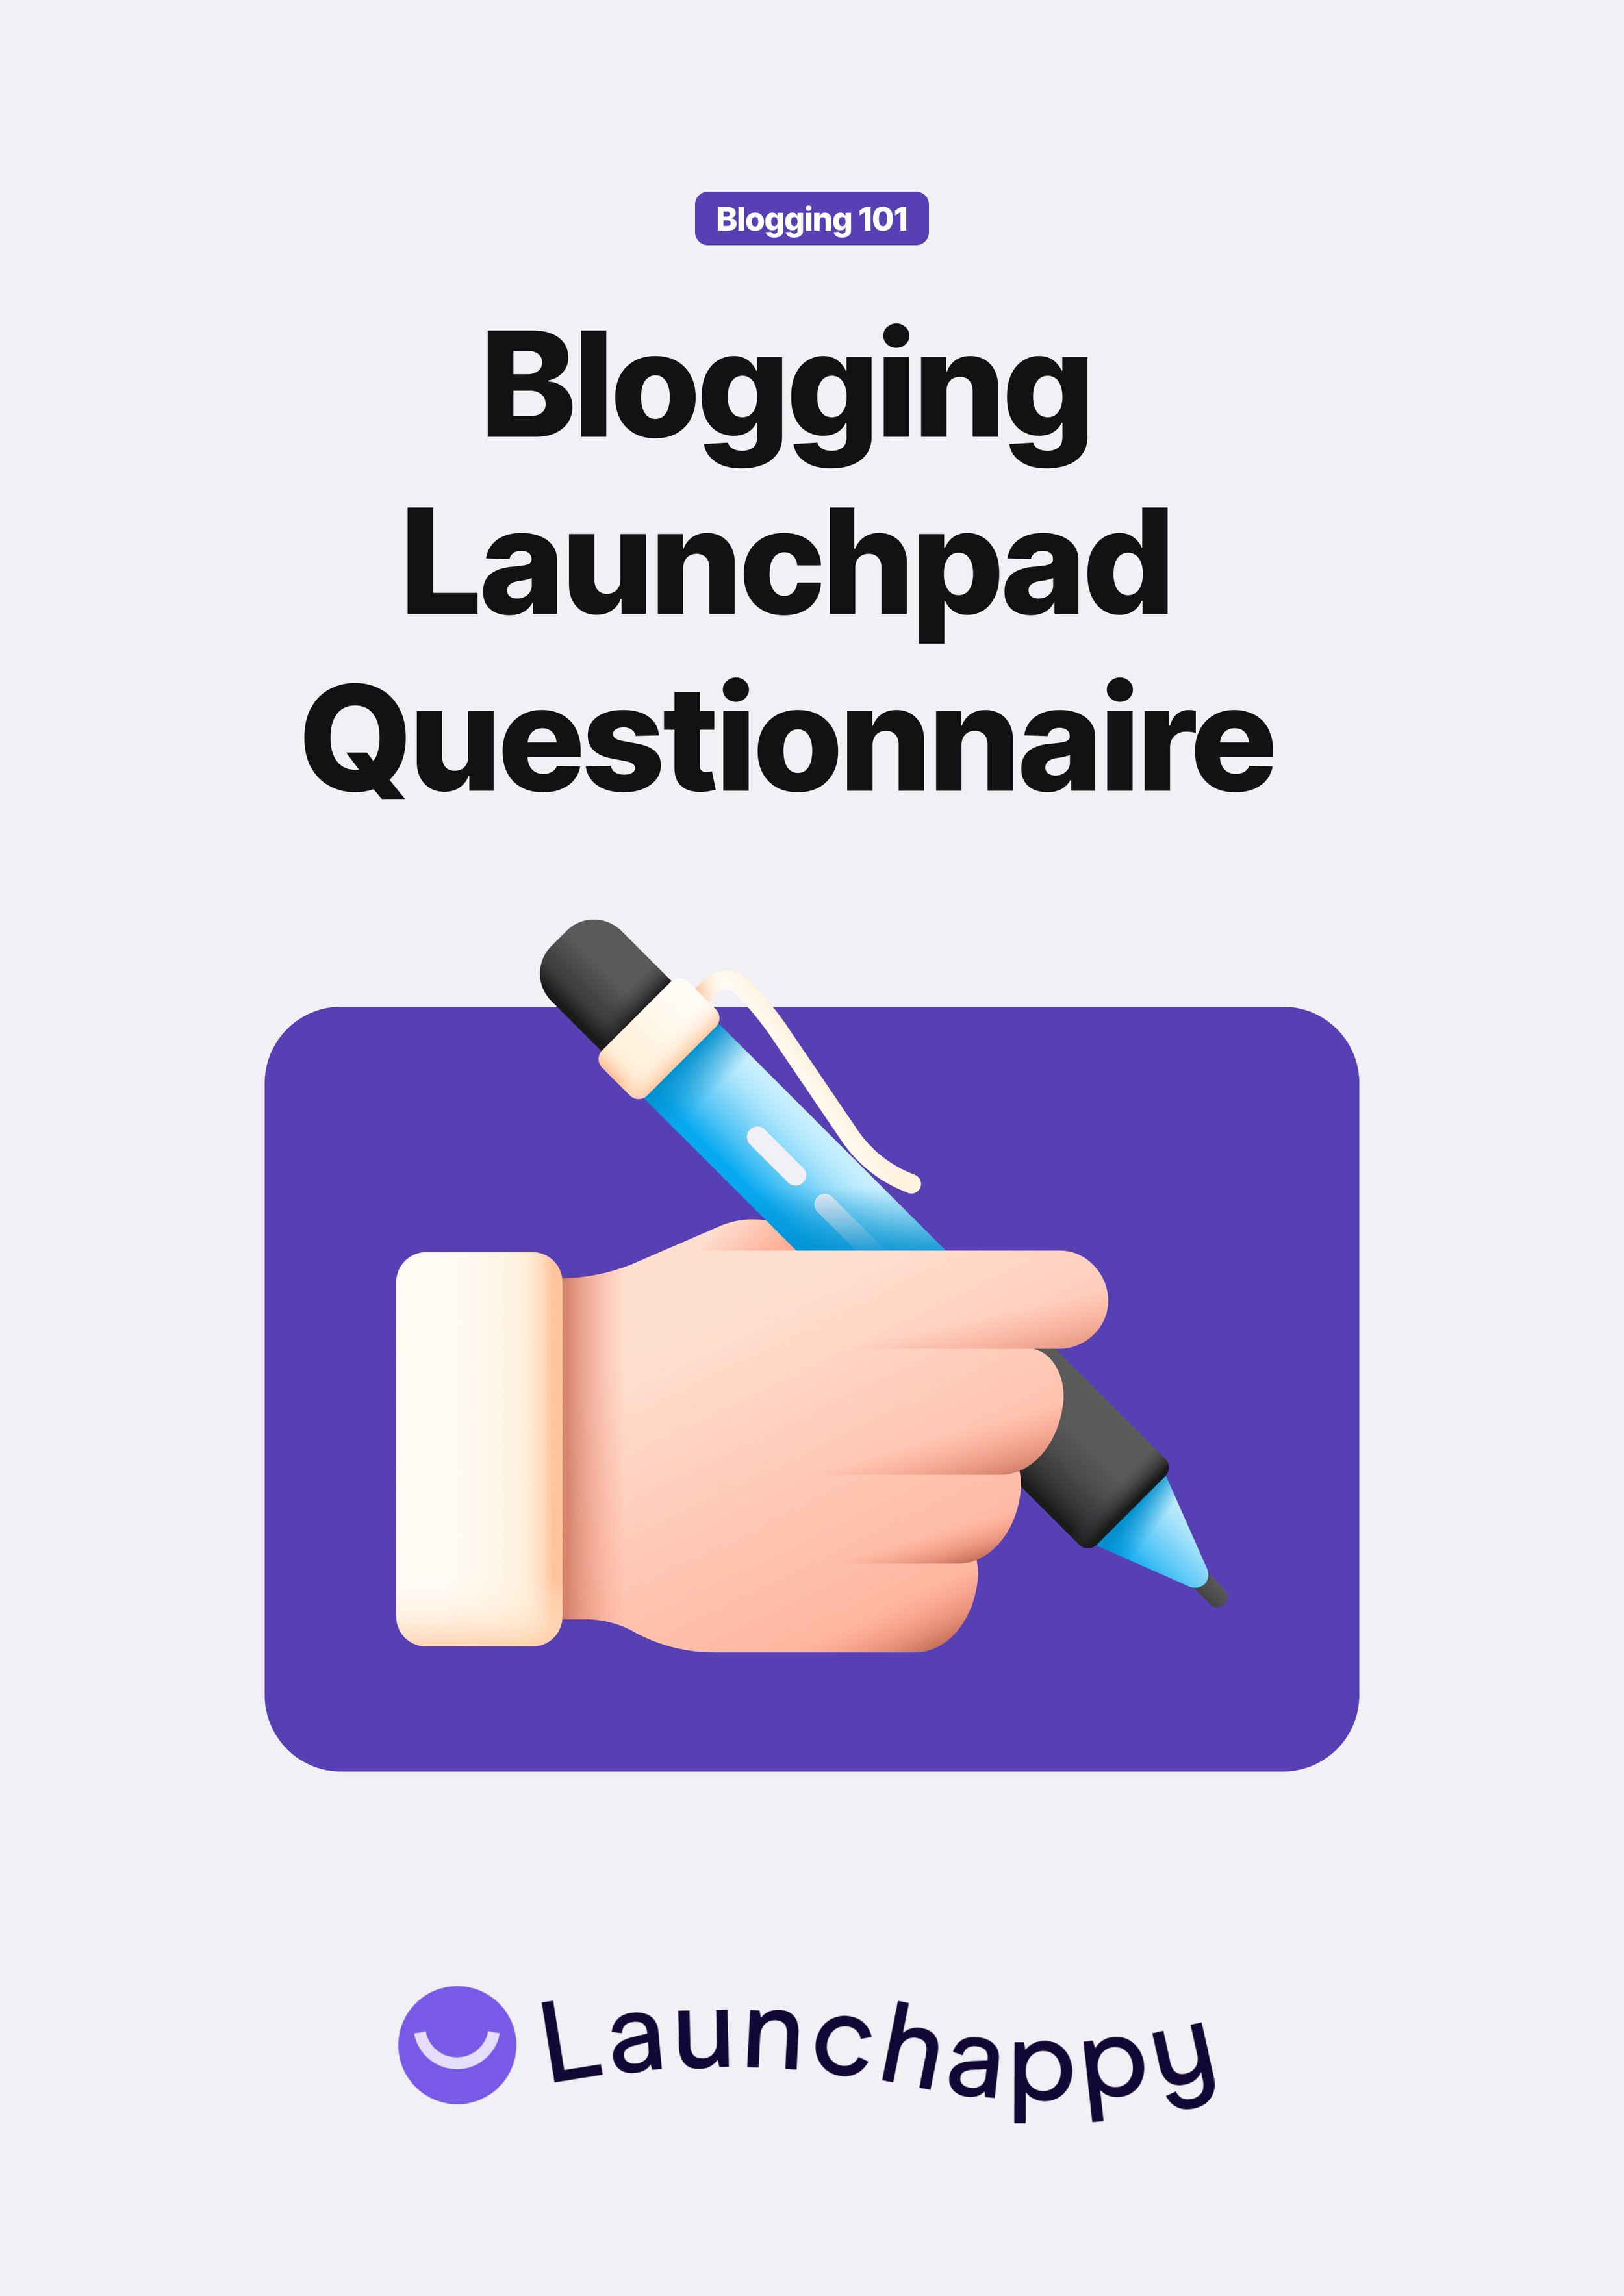 The Blogging Launchpad Questionnaire